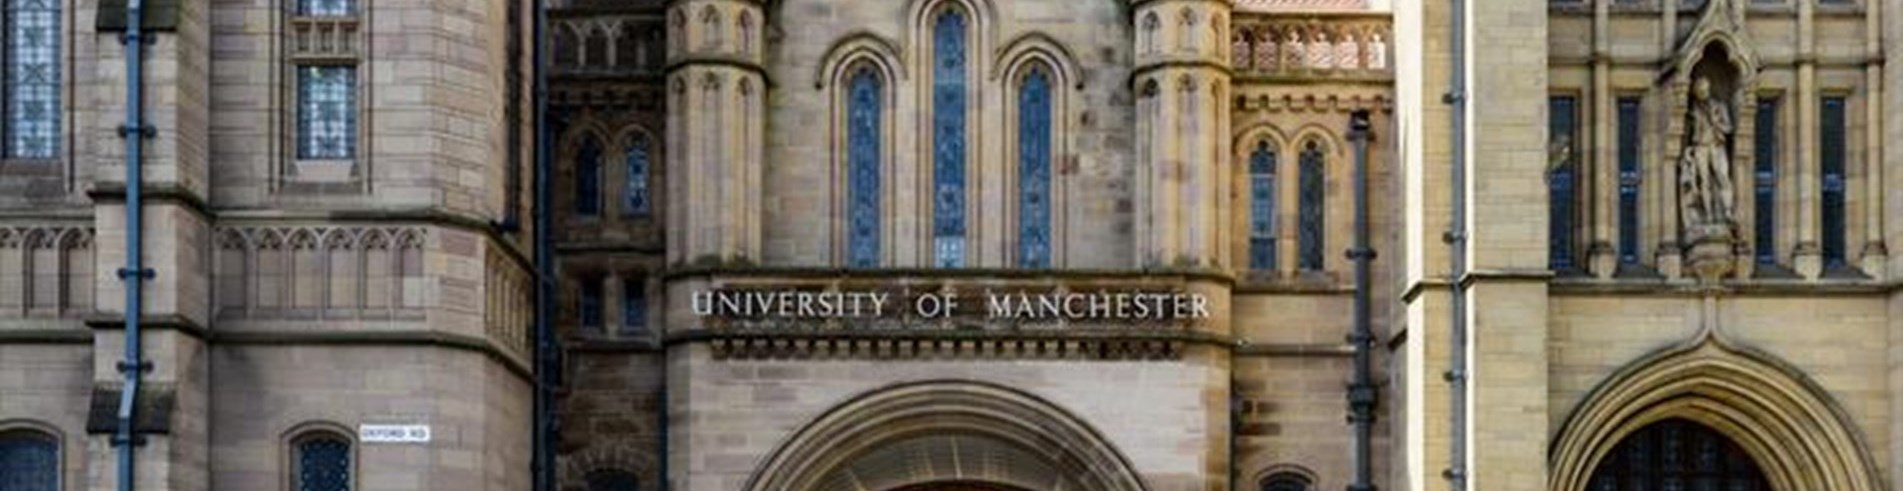 Teesdale Sixth Form student excels at Manchester University